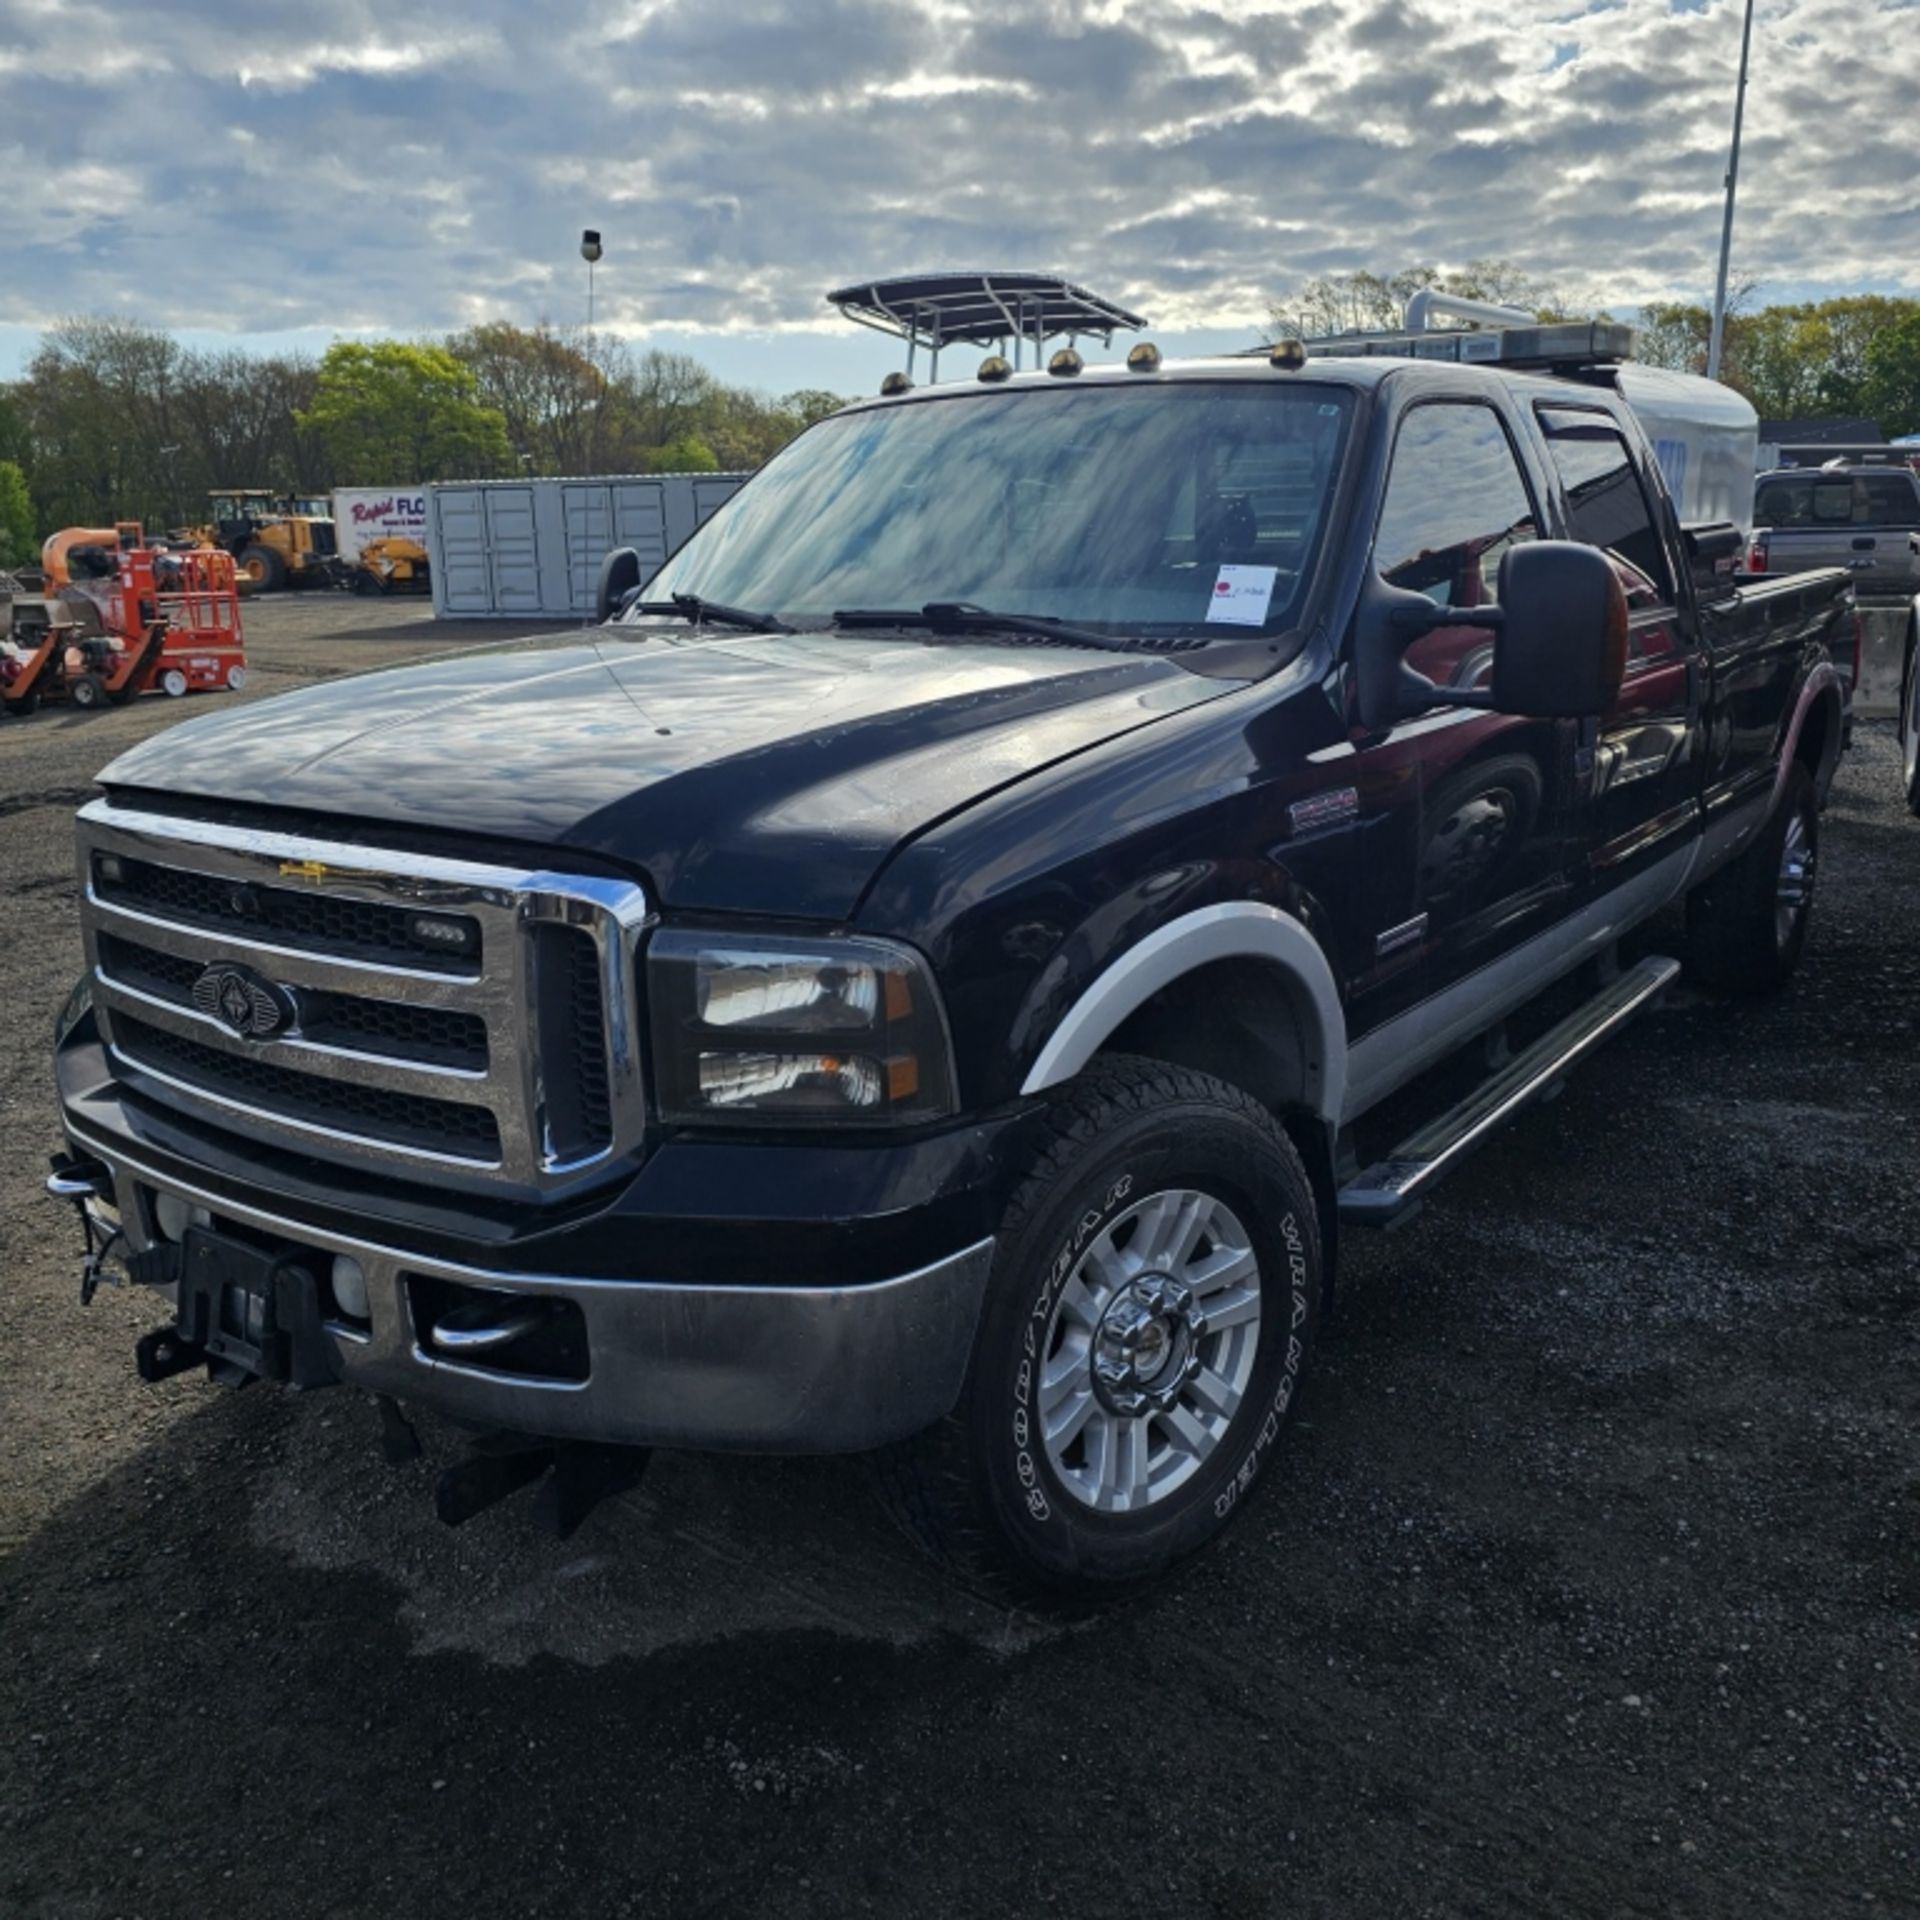 2005 Ford F350 Pickup - Image 2 of 8